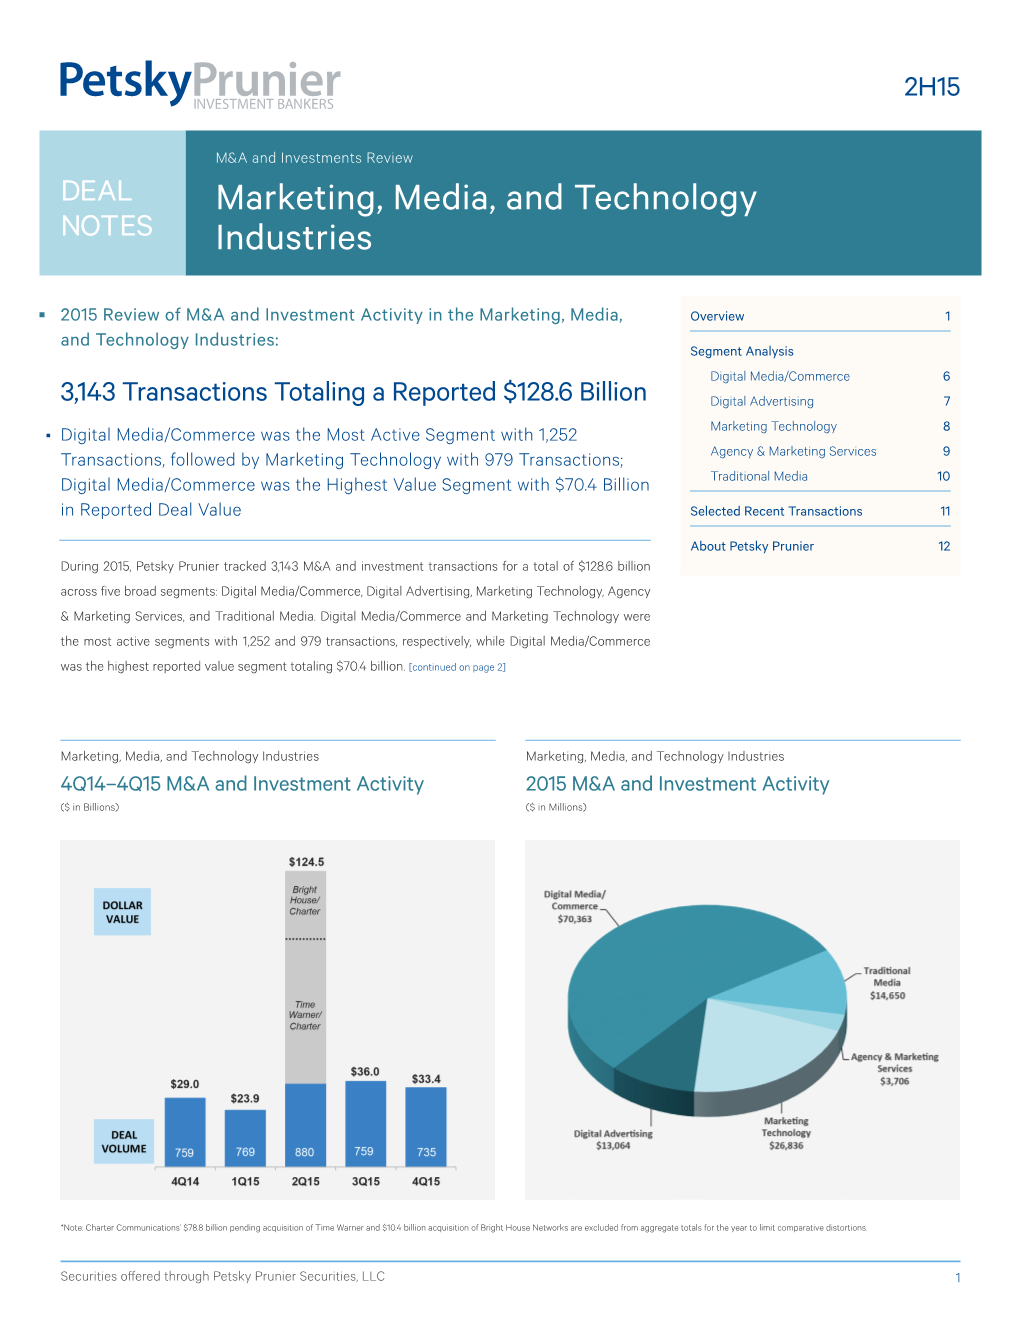 Marketing, Media, and Technology Industries